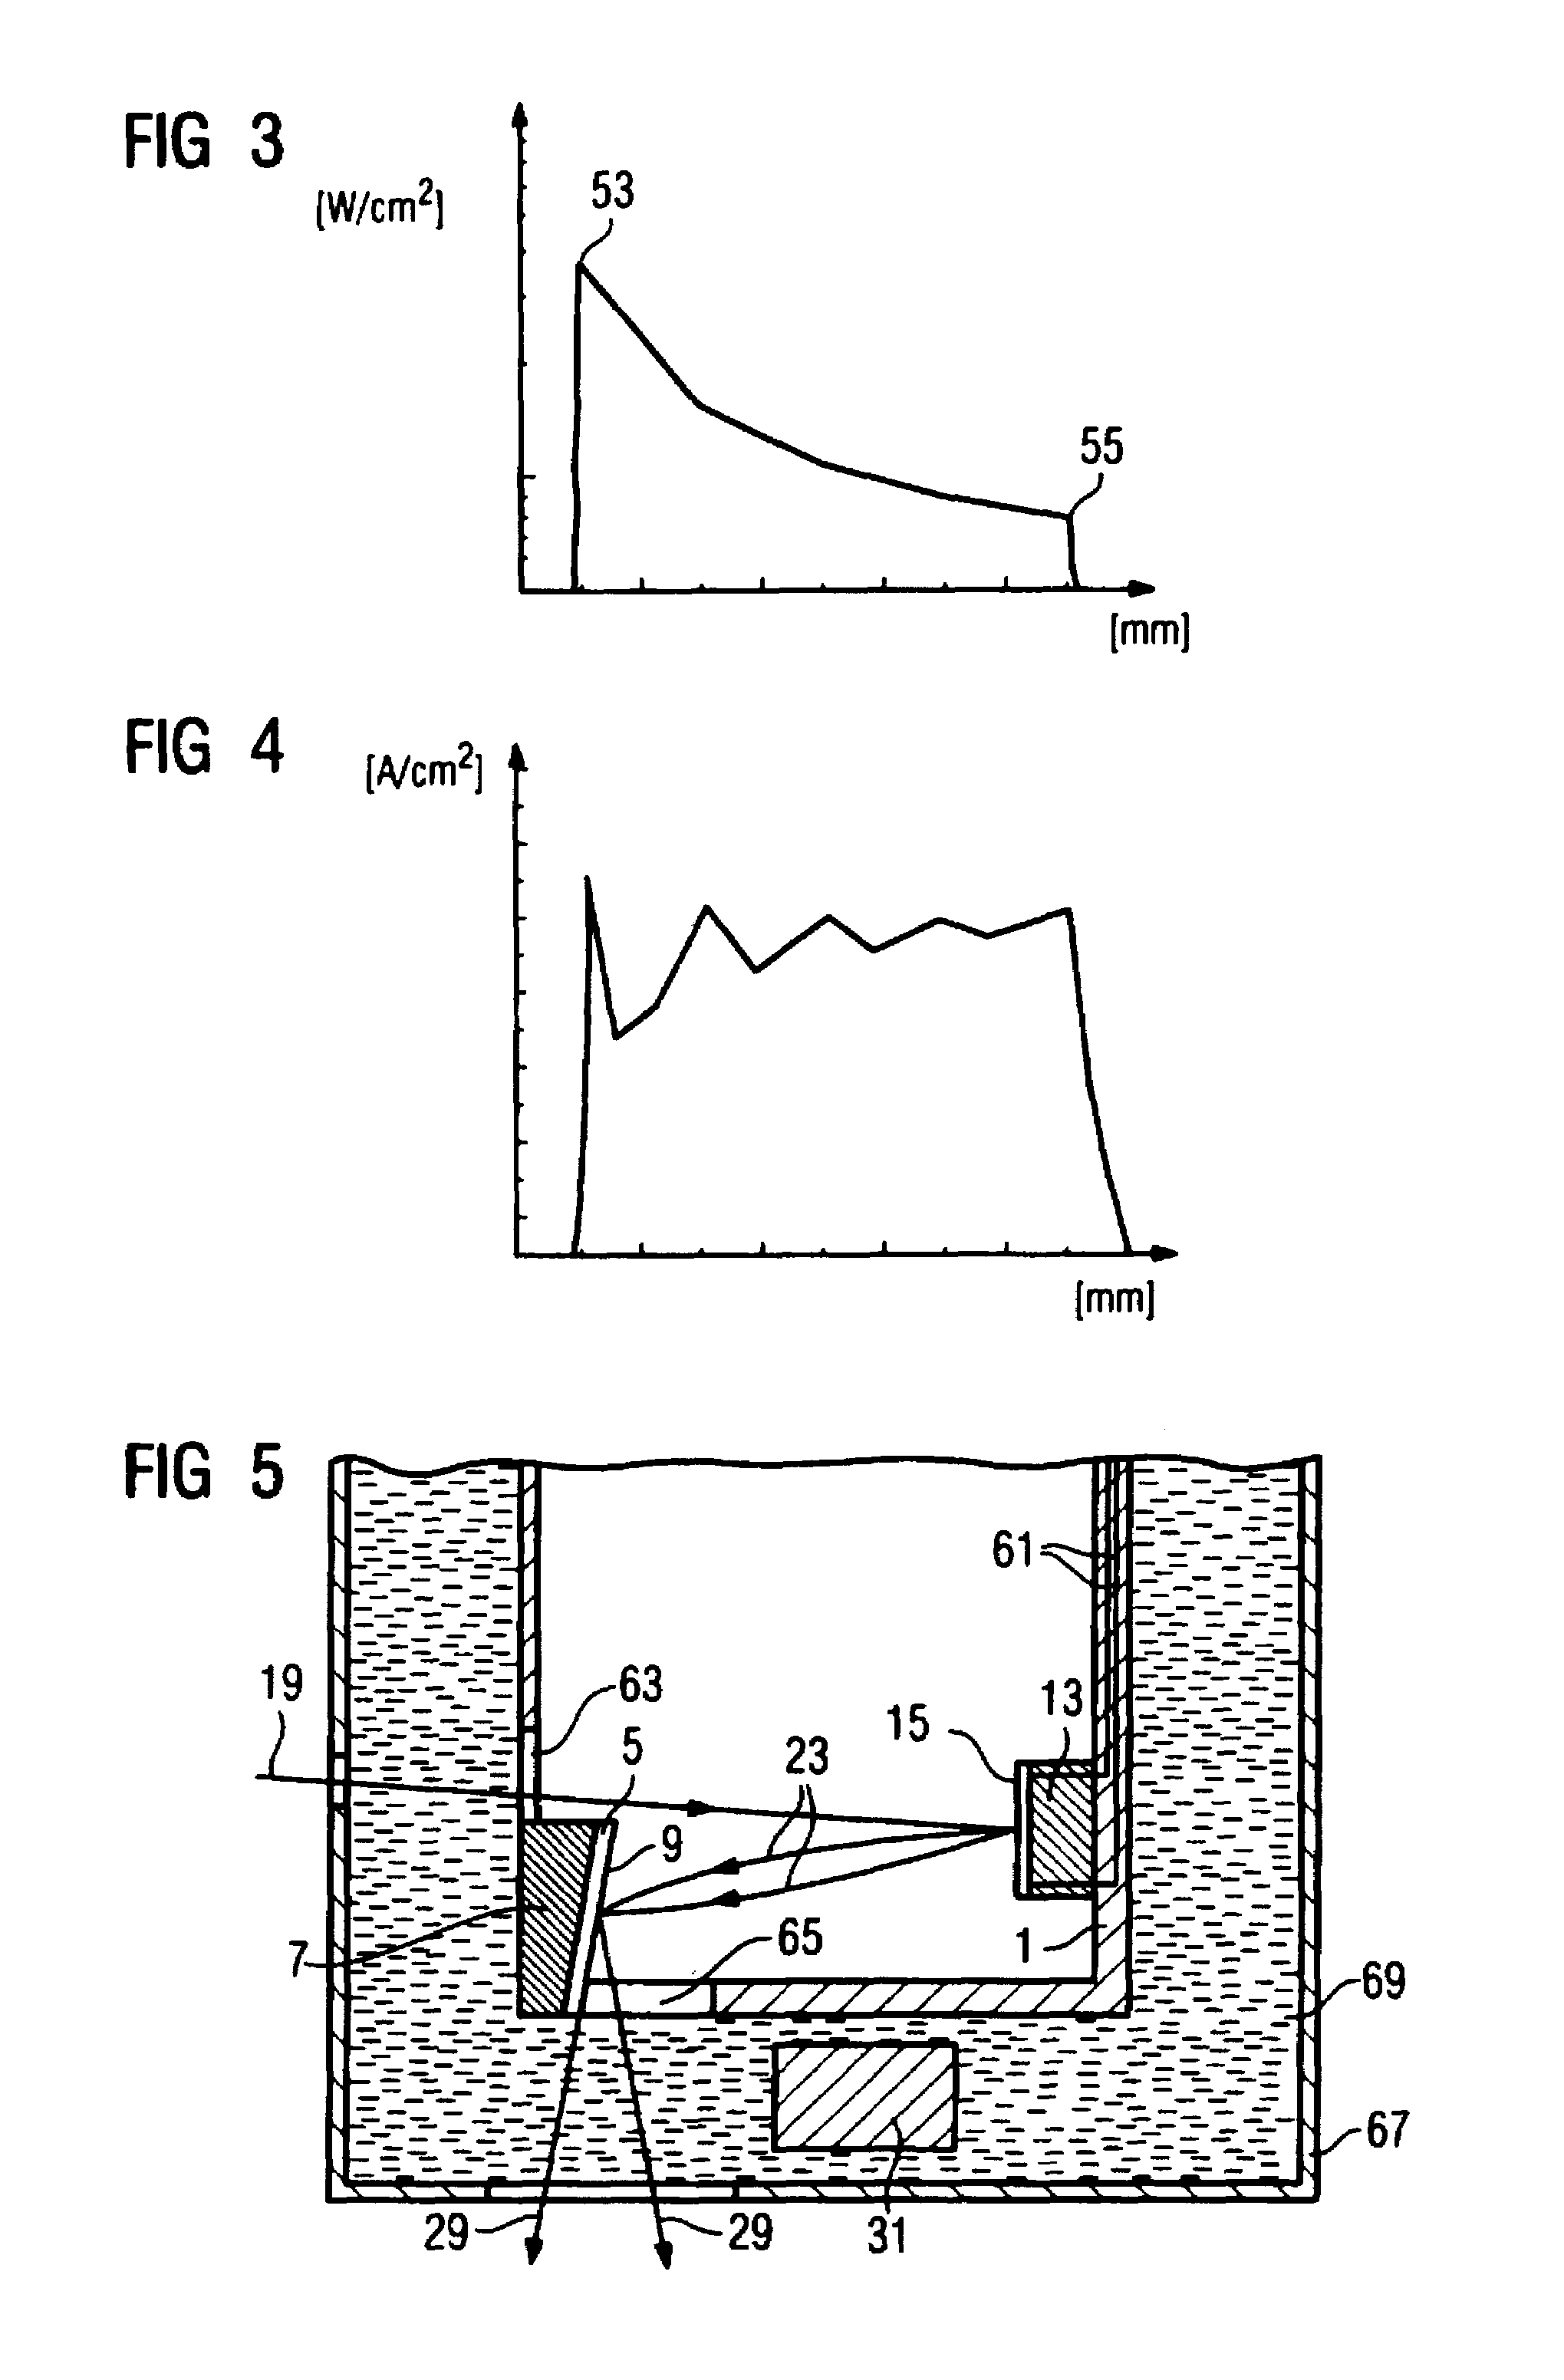 X-ray radiator with thermionic emission of electrons from a laser-irradiated cathode